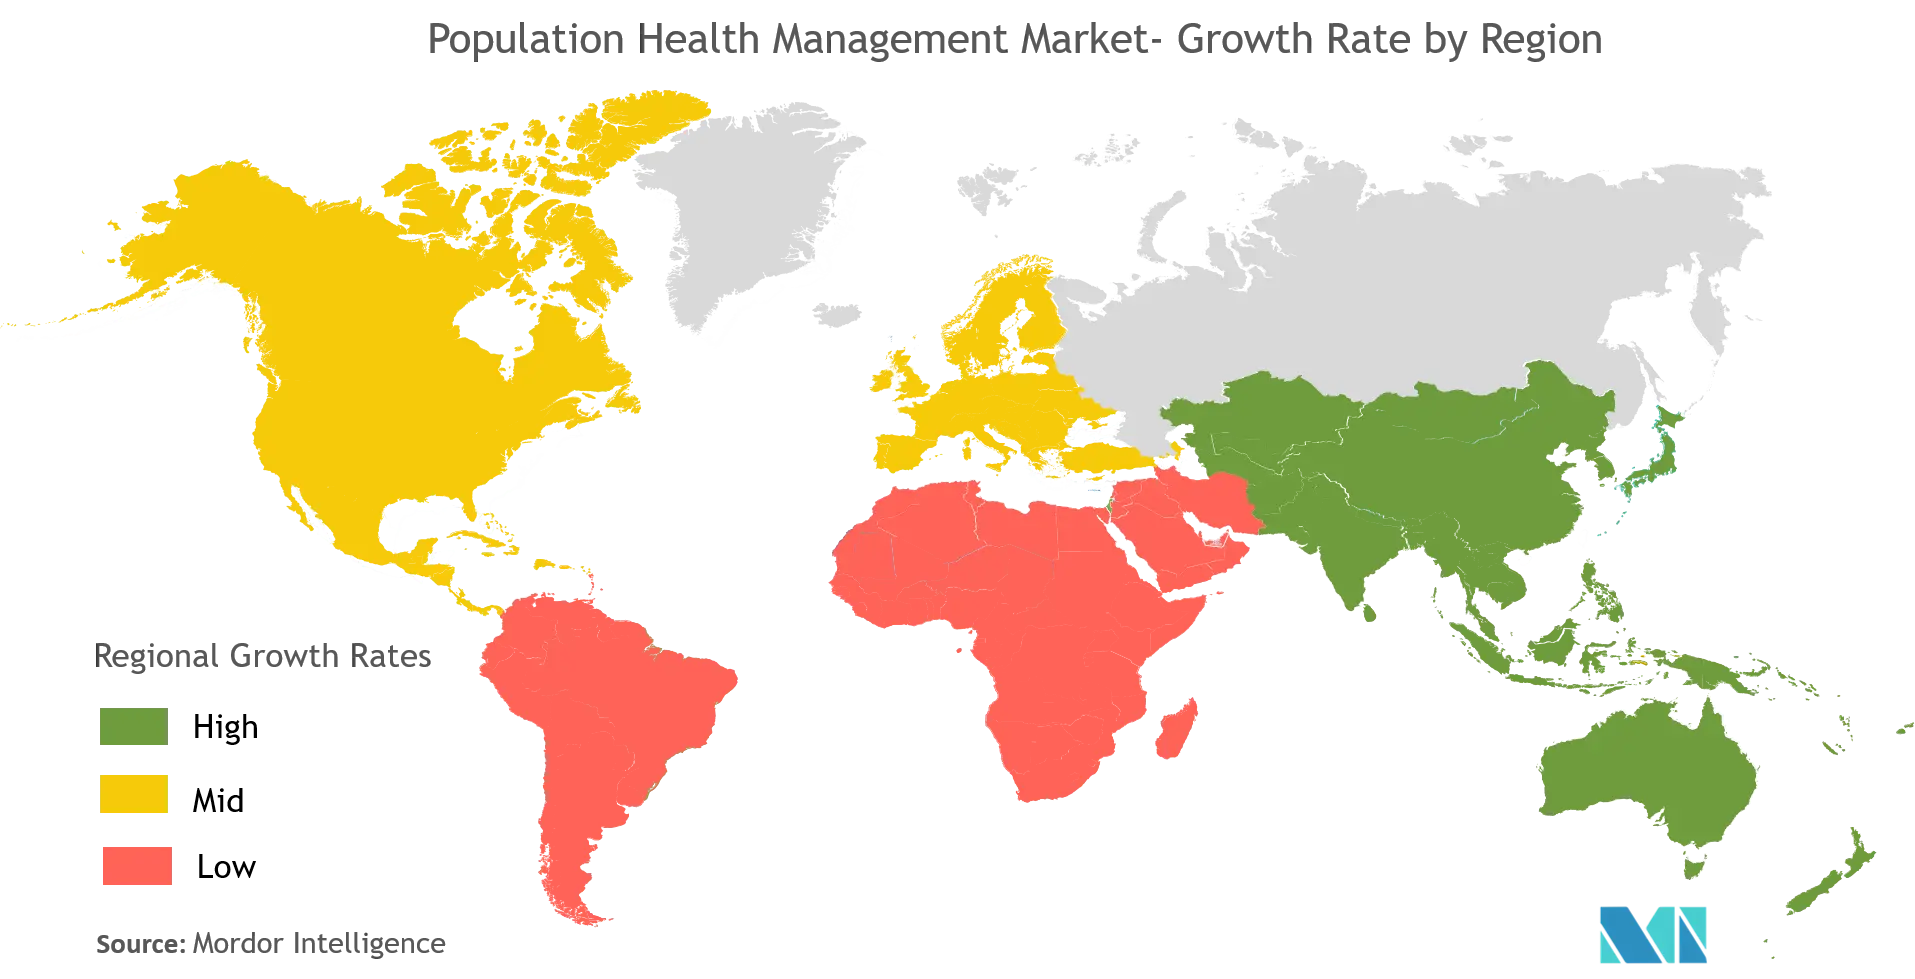 Population Health Management Market - Growth Rate by Region